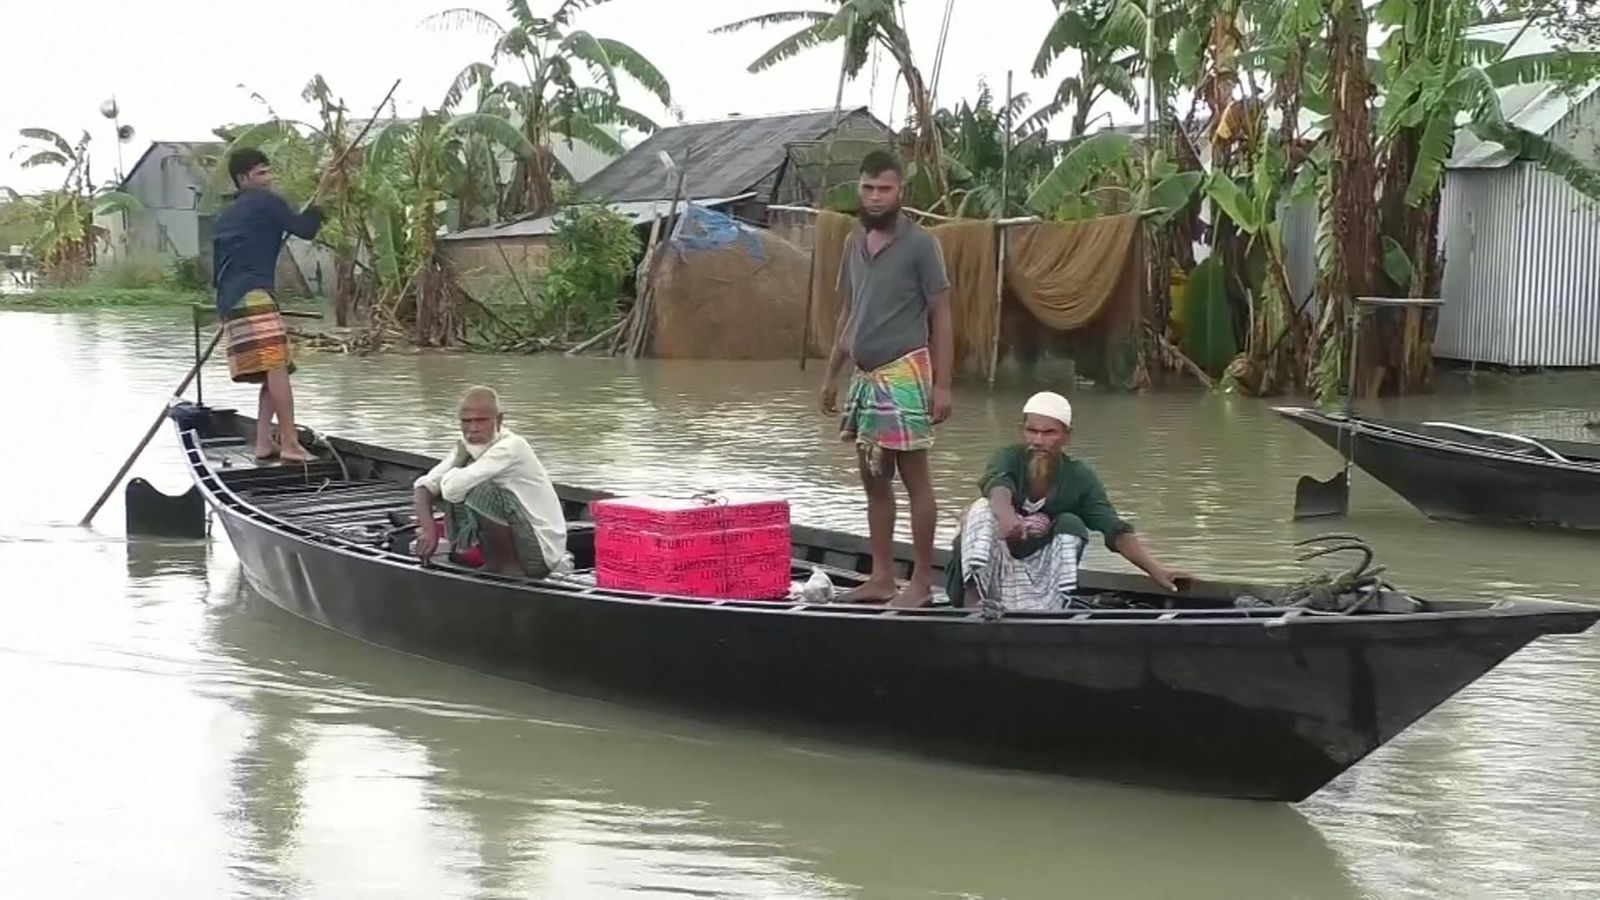 Family evacuate their home by boat in Bangladesh floods